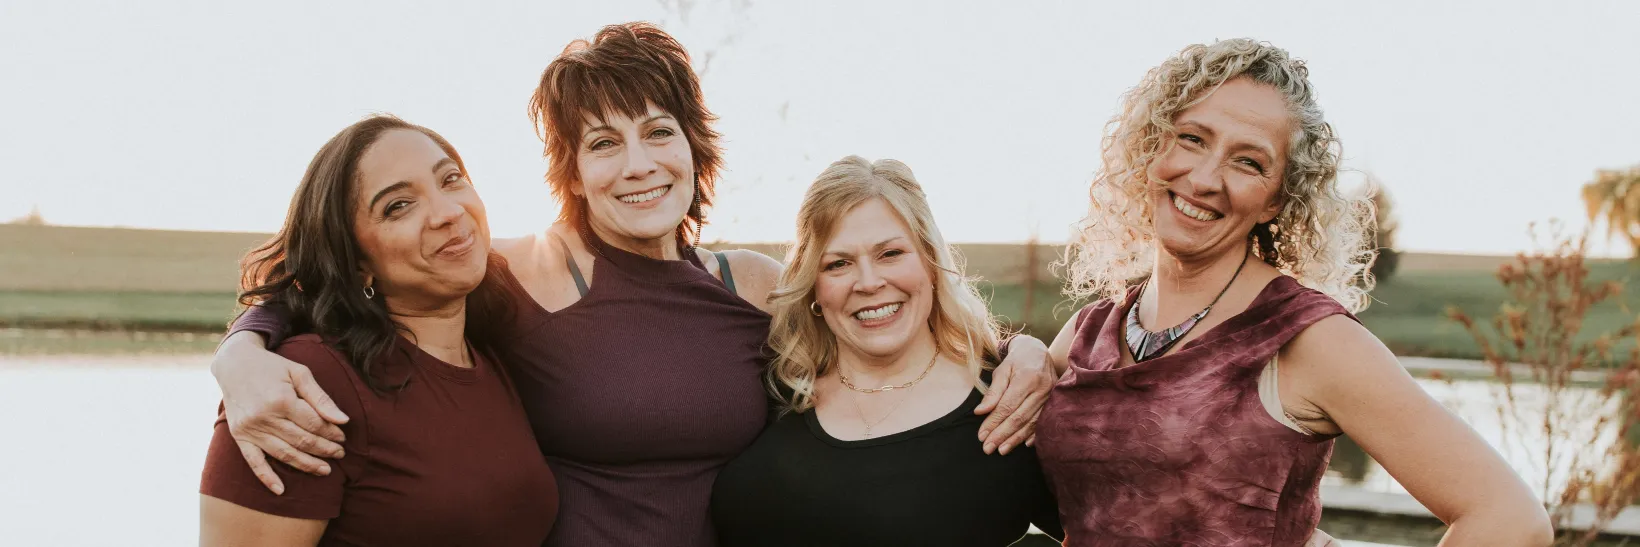 Four smiling women stand together